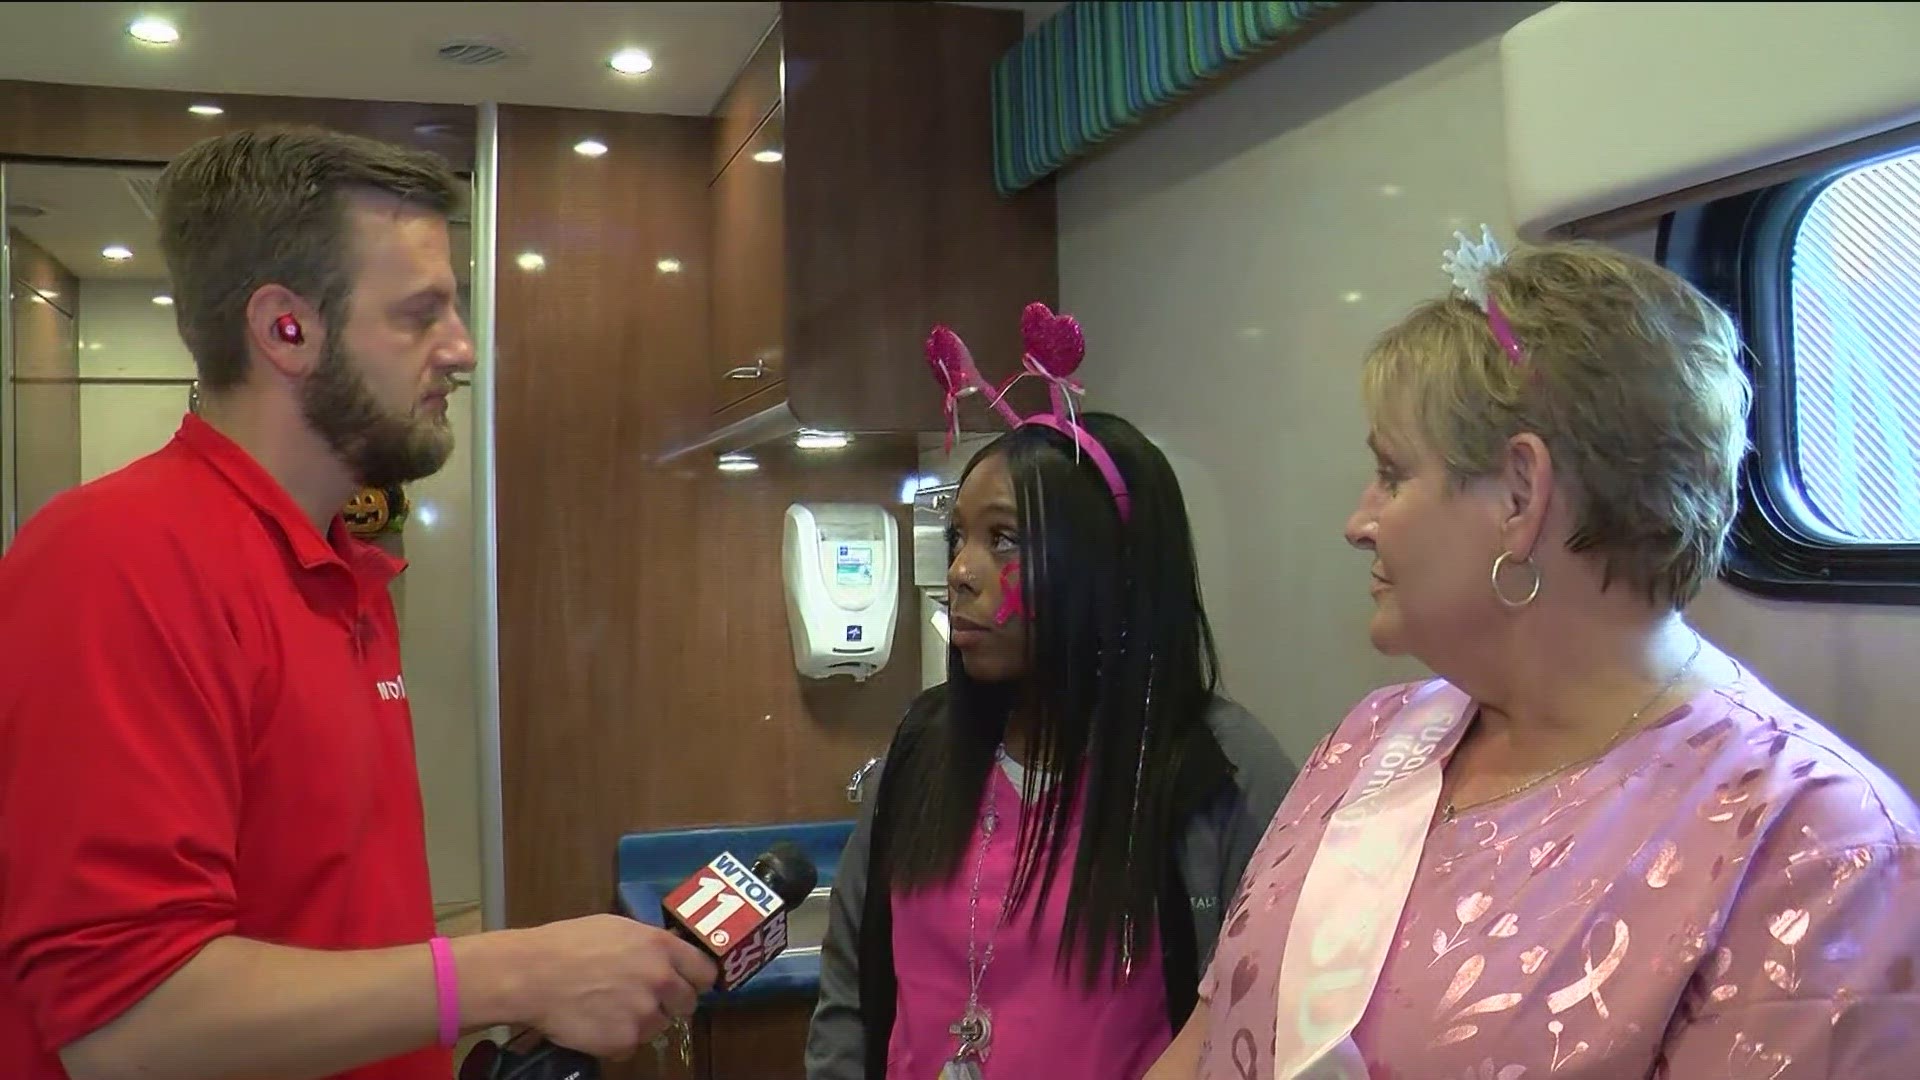 Jon Monk talks to Jamie and Ashley of the Mobile Mammogram bus, where breast cancer detection can begin. A participant also talks about his purpose in running.